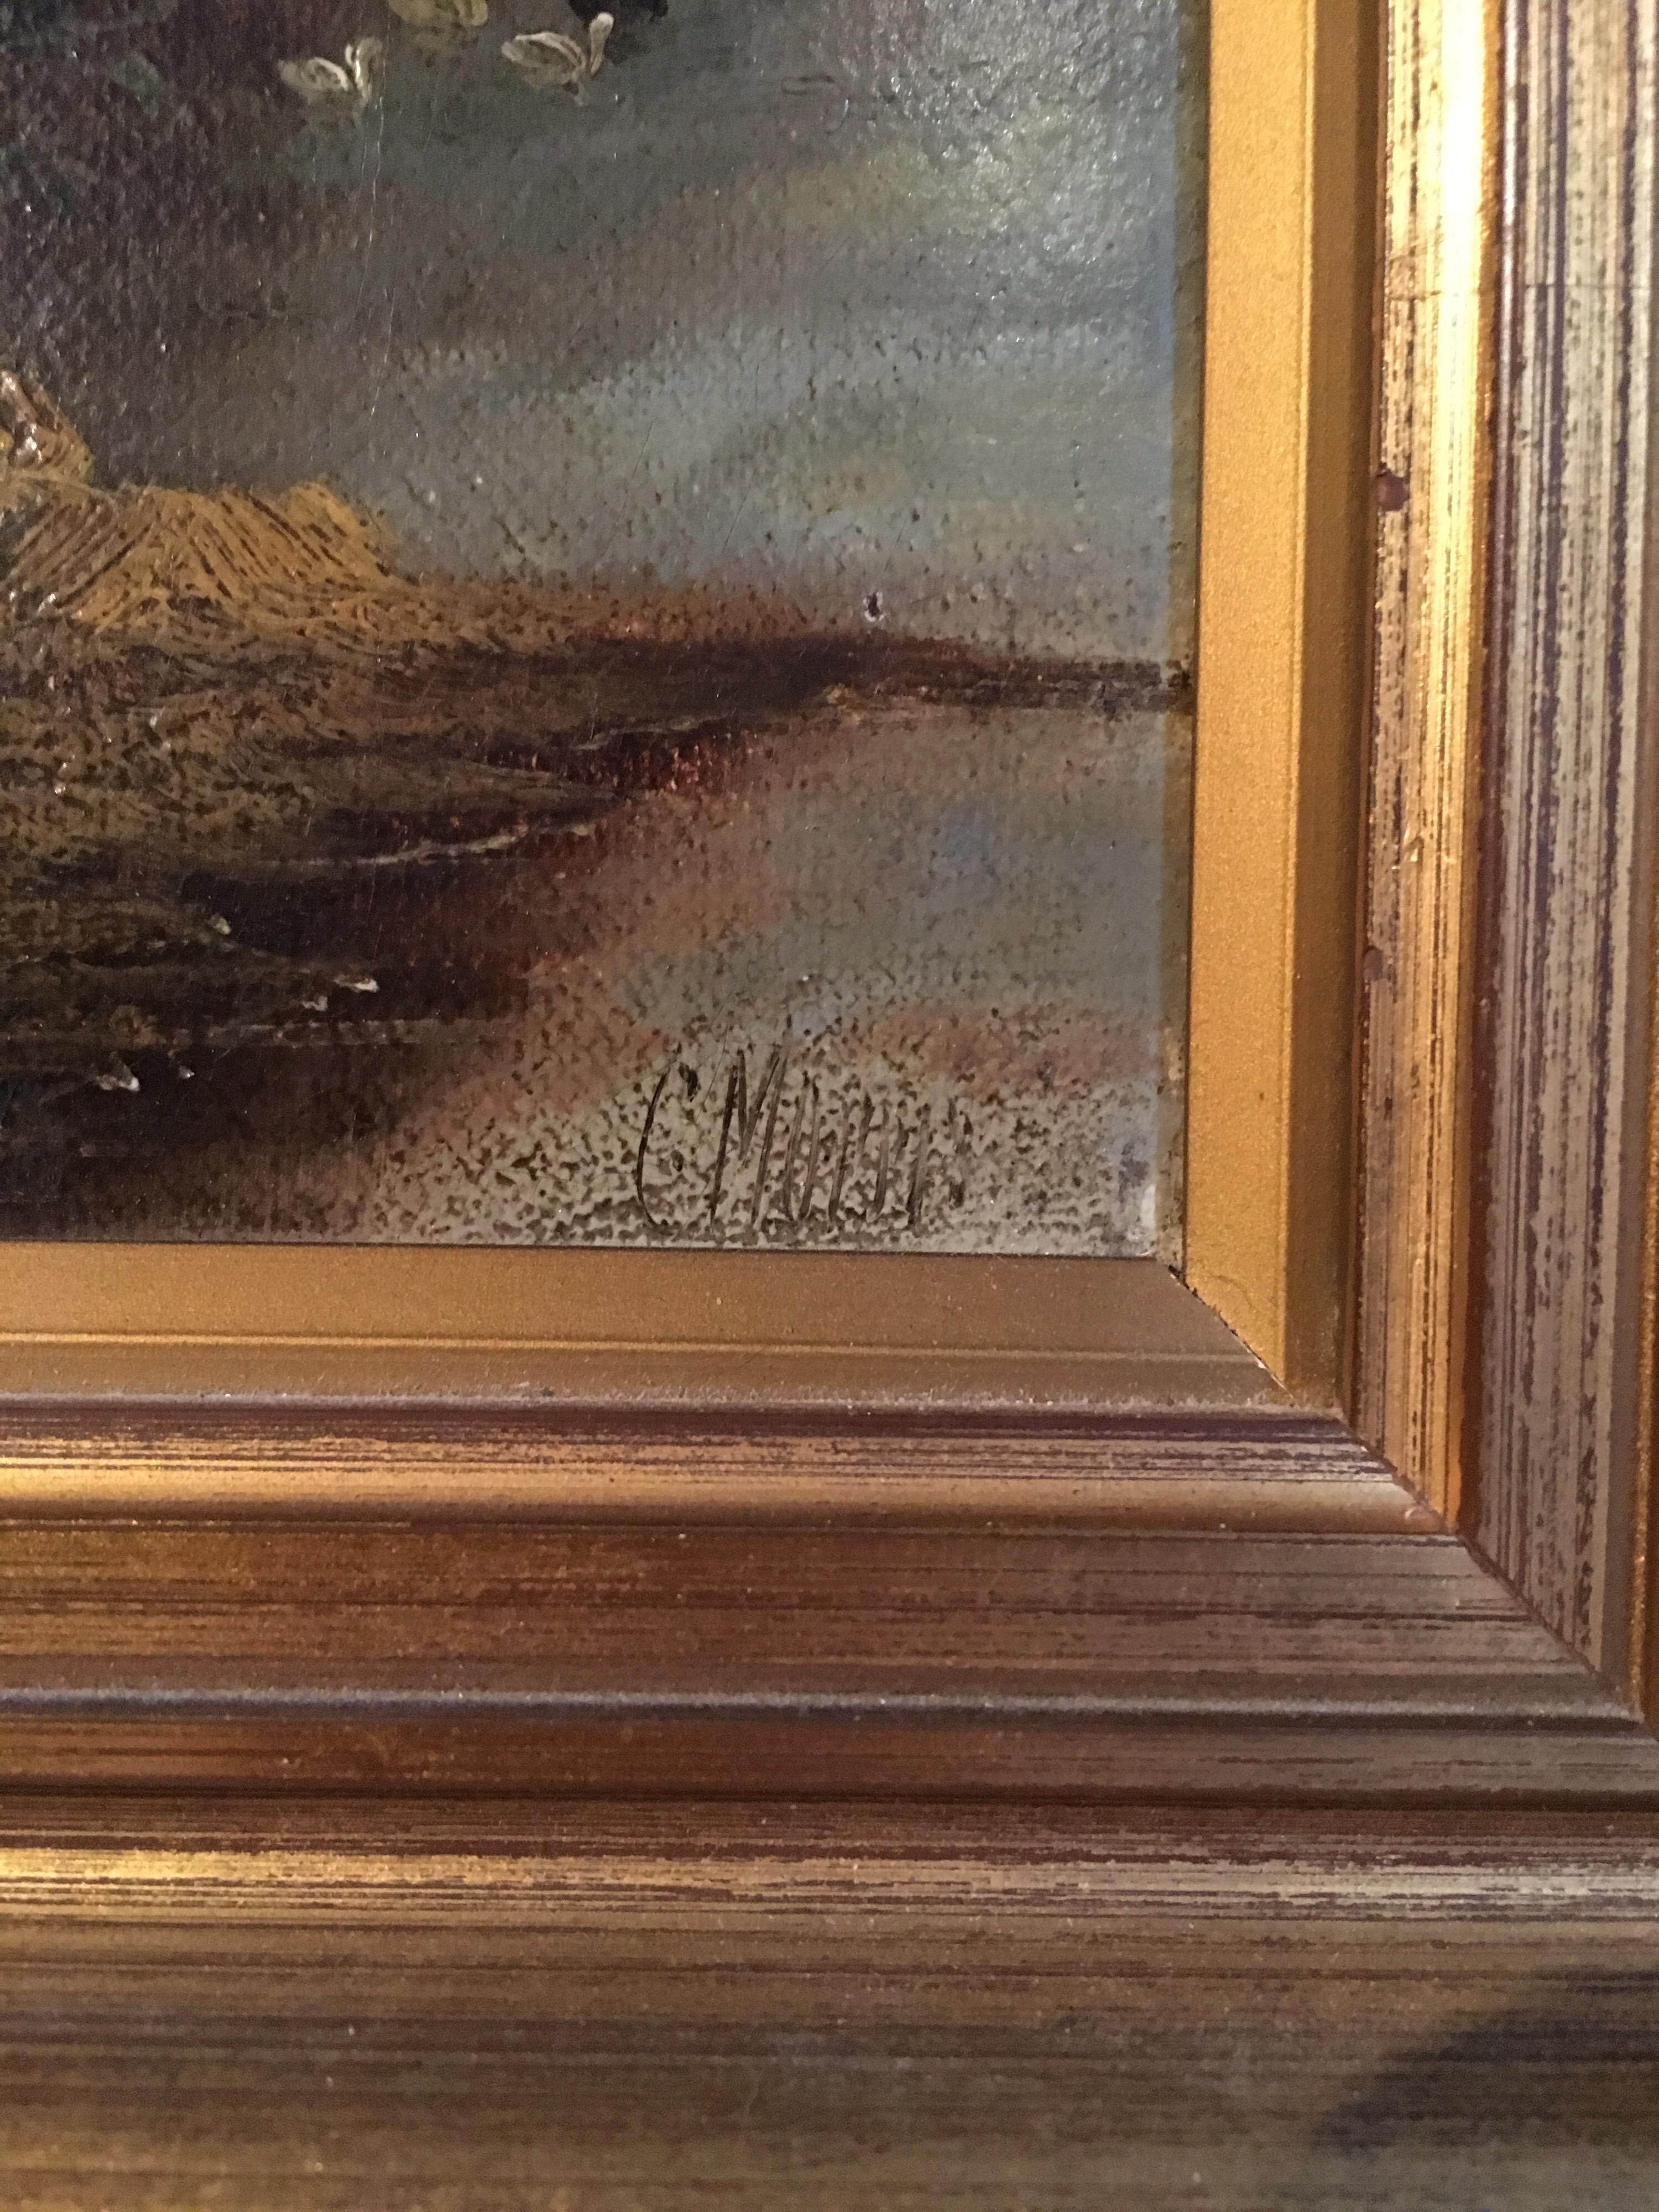 Autumnal Landscape, Fine Victorian Oil Painting, Signed - Brown Landscape Painting by Charles Greville Morris